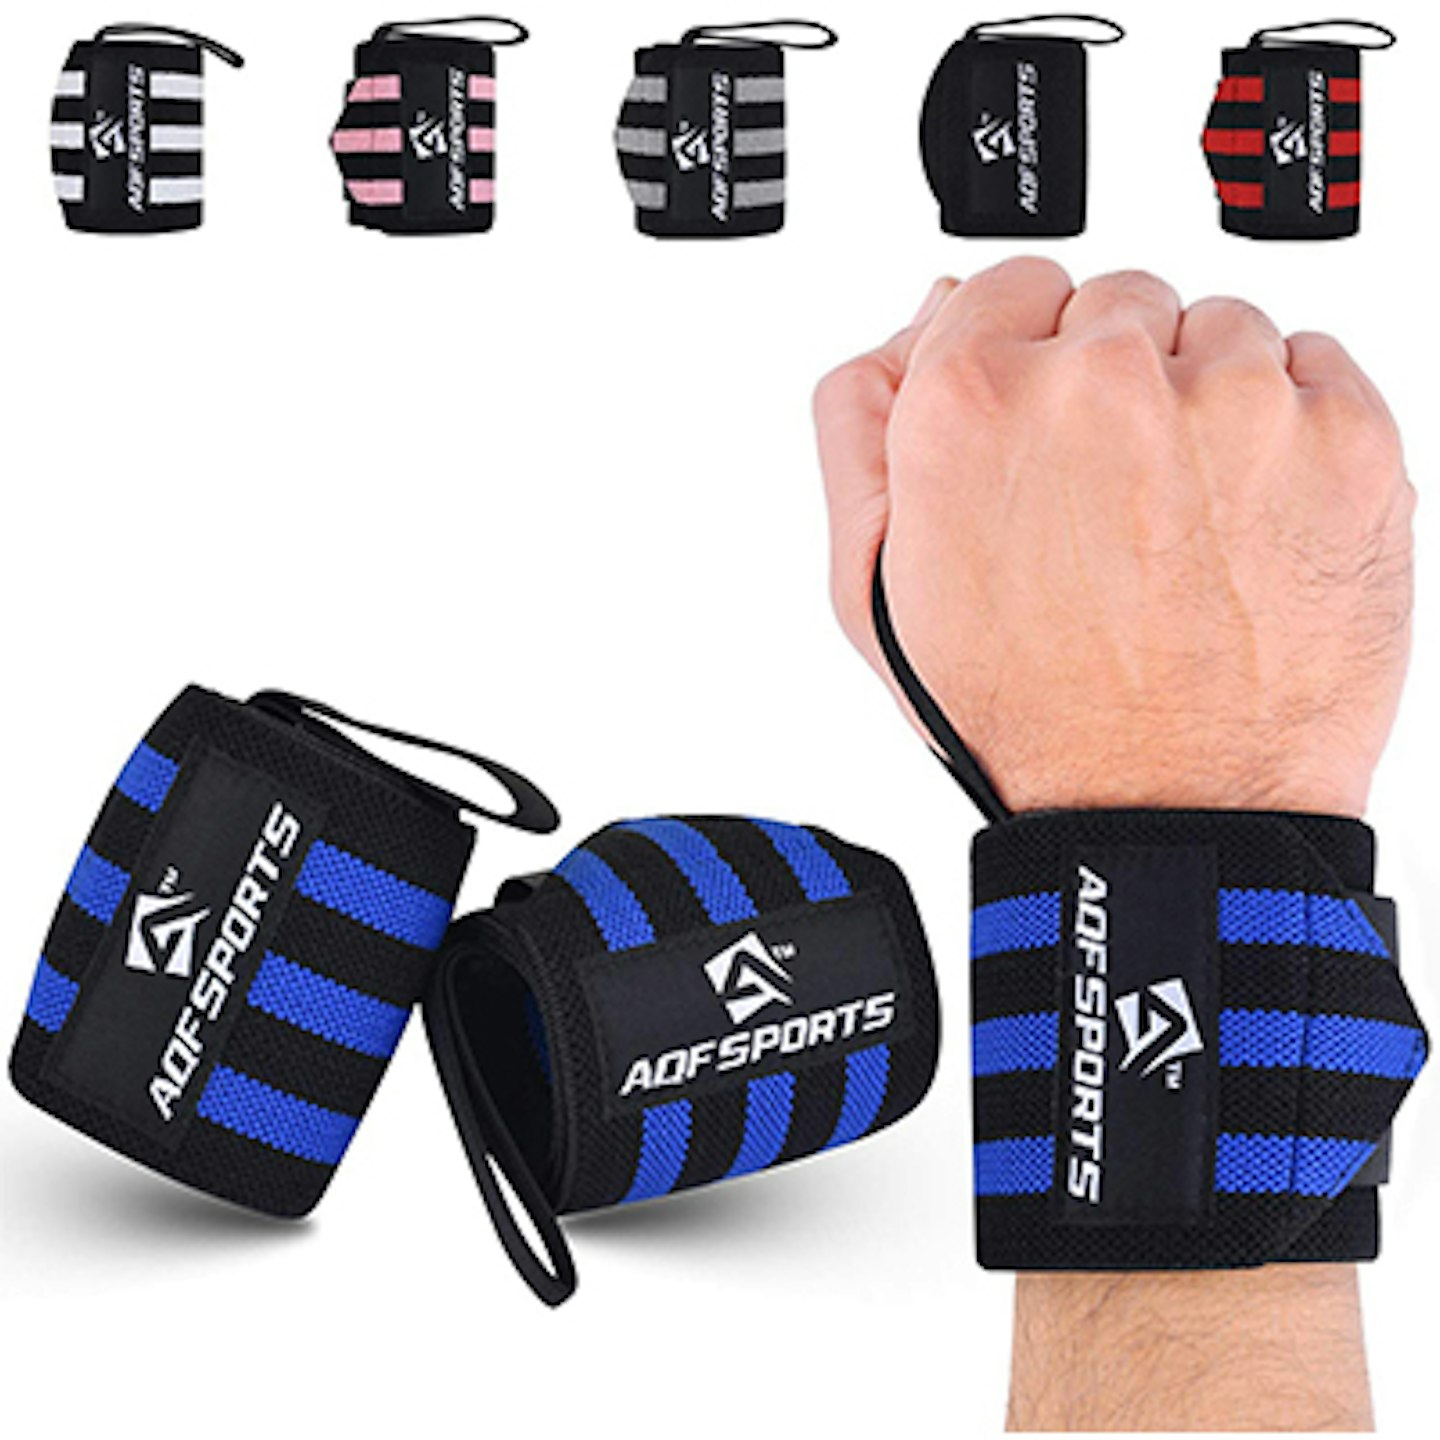  Beast Gear Wrist Wraps for Weightlifting - 20 Wrist Support  Straps for Weight Lifting with Thumb Loop : Sports & Outdoors